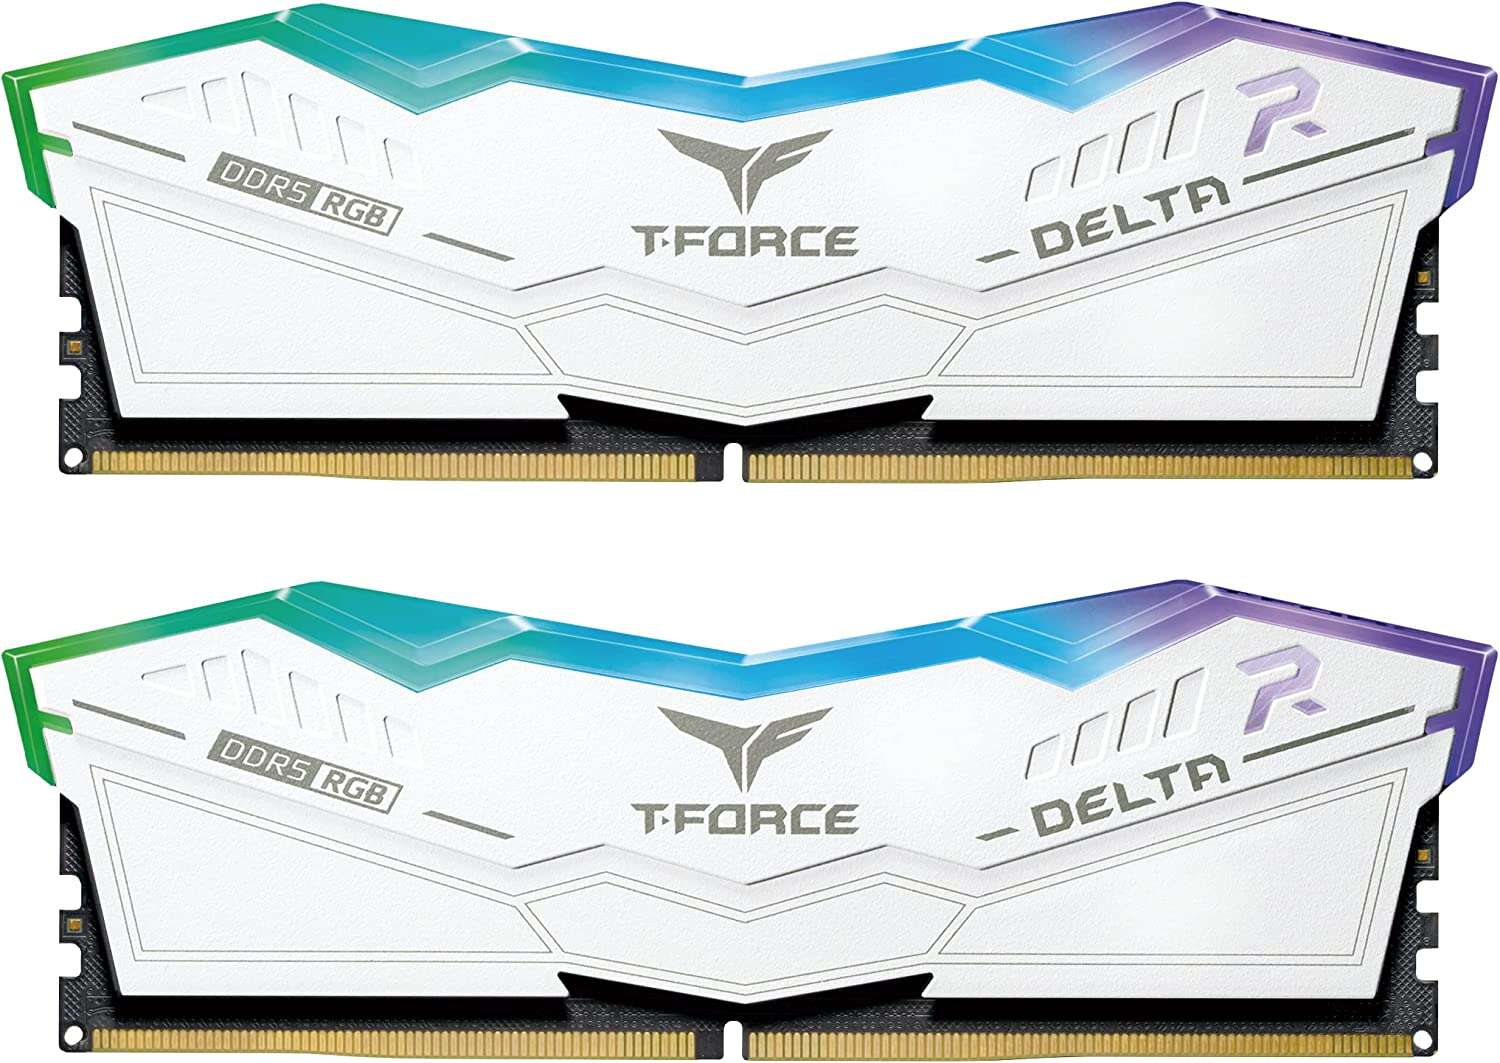 Teamgroup 32gb / 6400 t-force delta rgb white ddr5 ram kit (2x16gb)